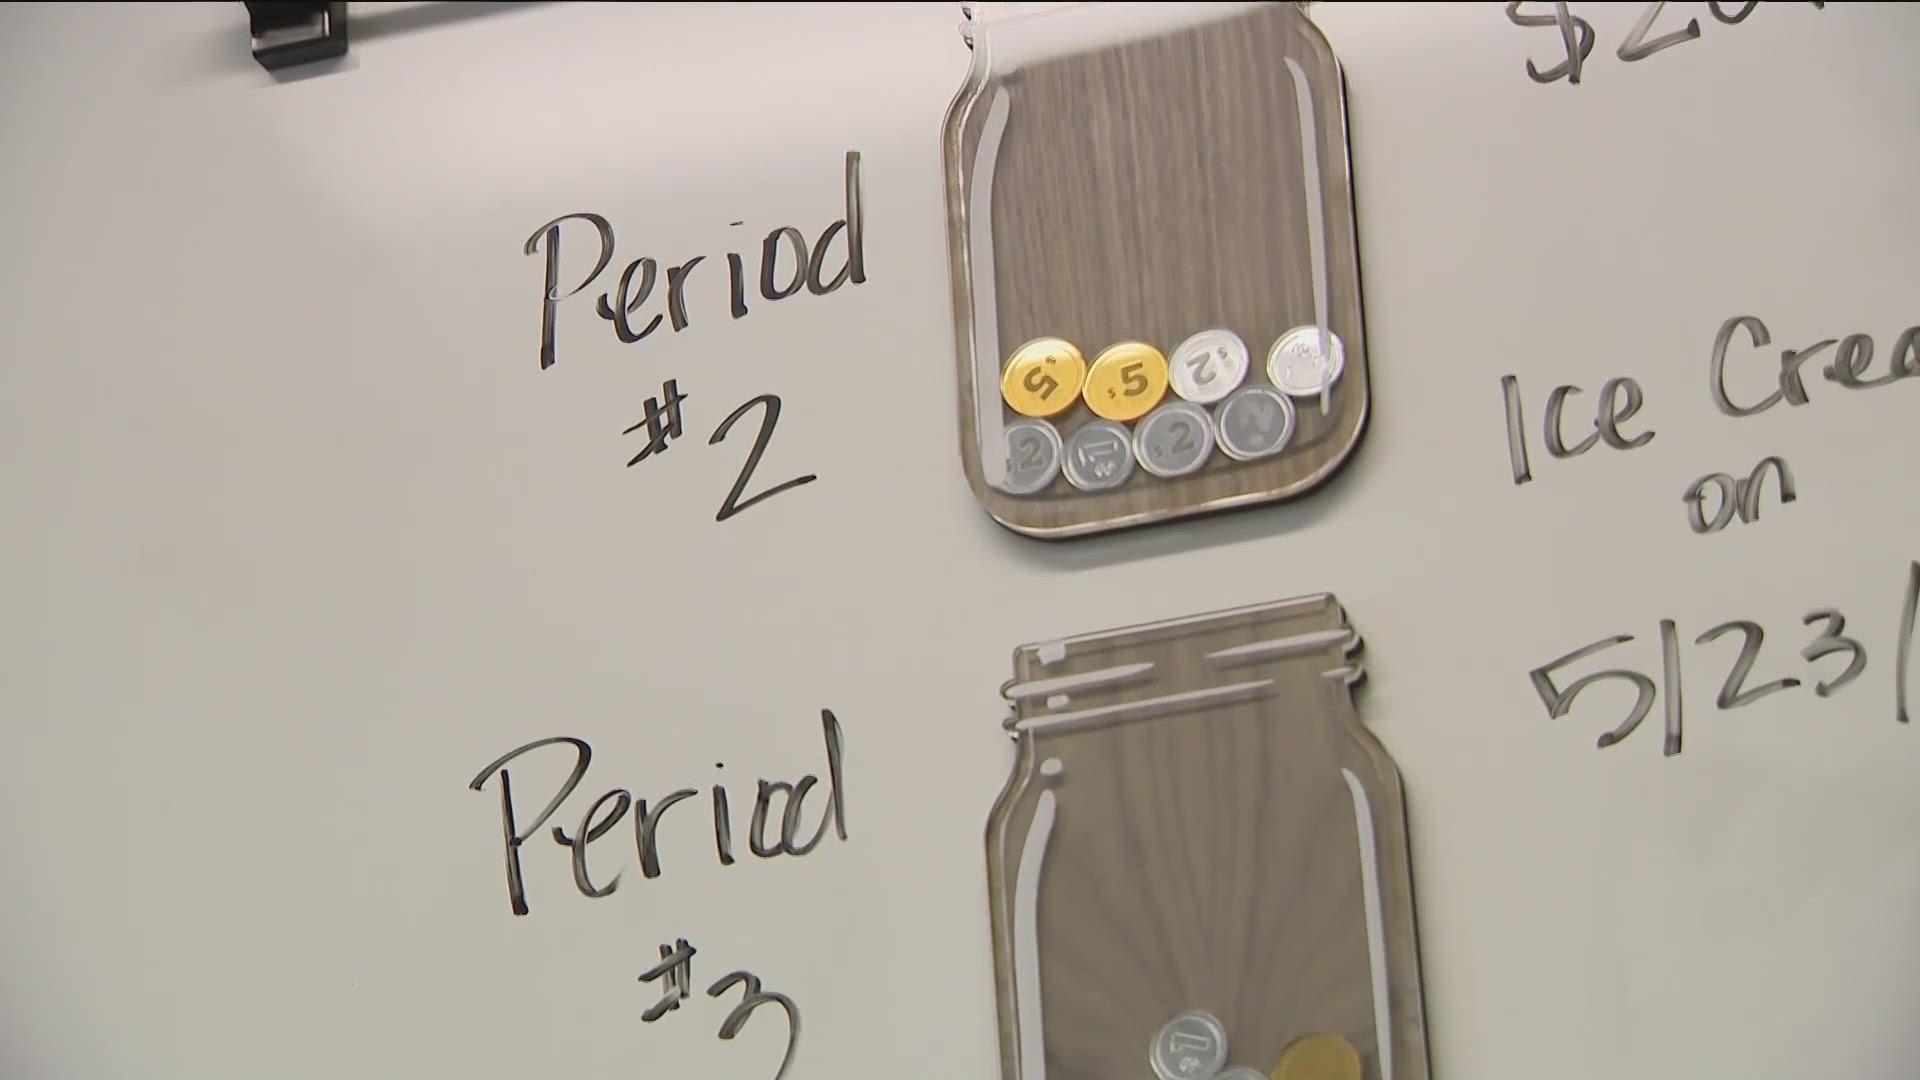 With a change to how schools receive money, administrators believe they are not getting all the money promised during the legislative session.